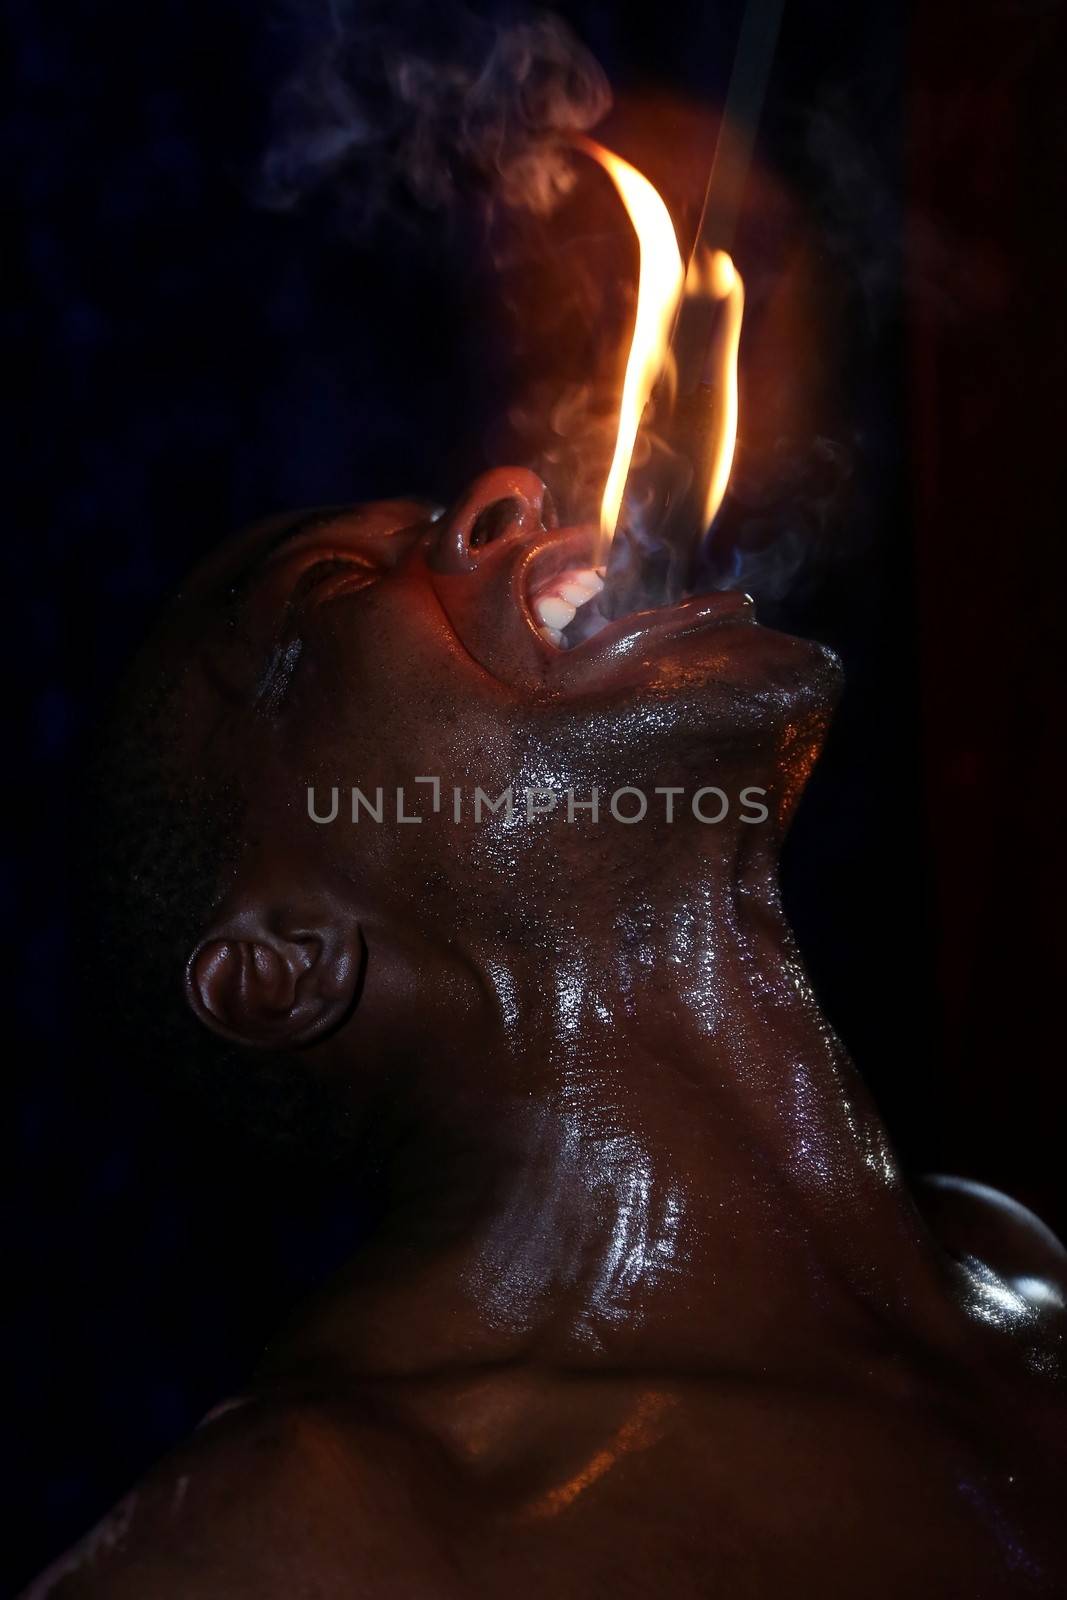 Fire Eater at the Circus by fouroaks